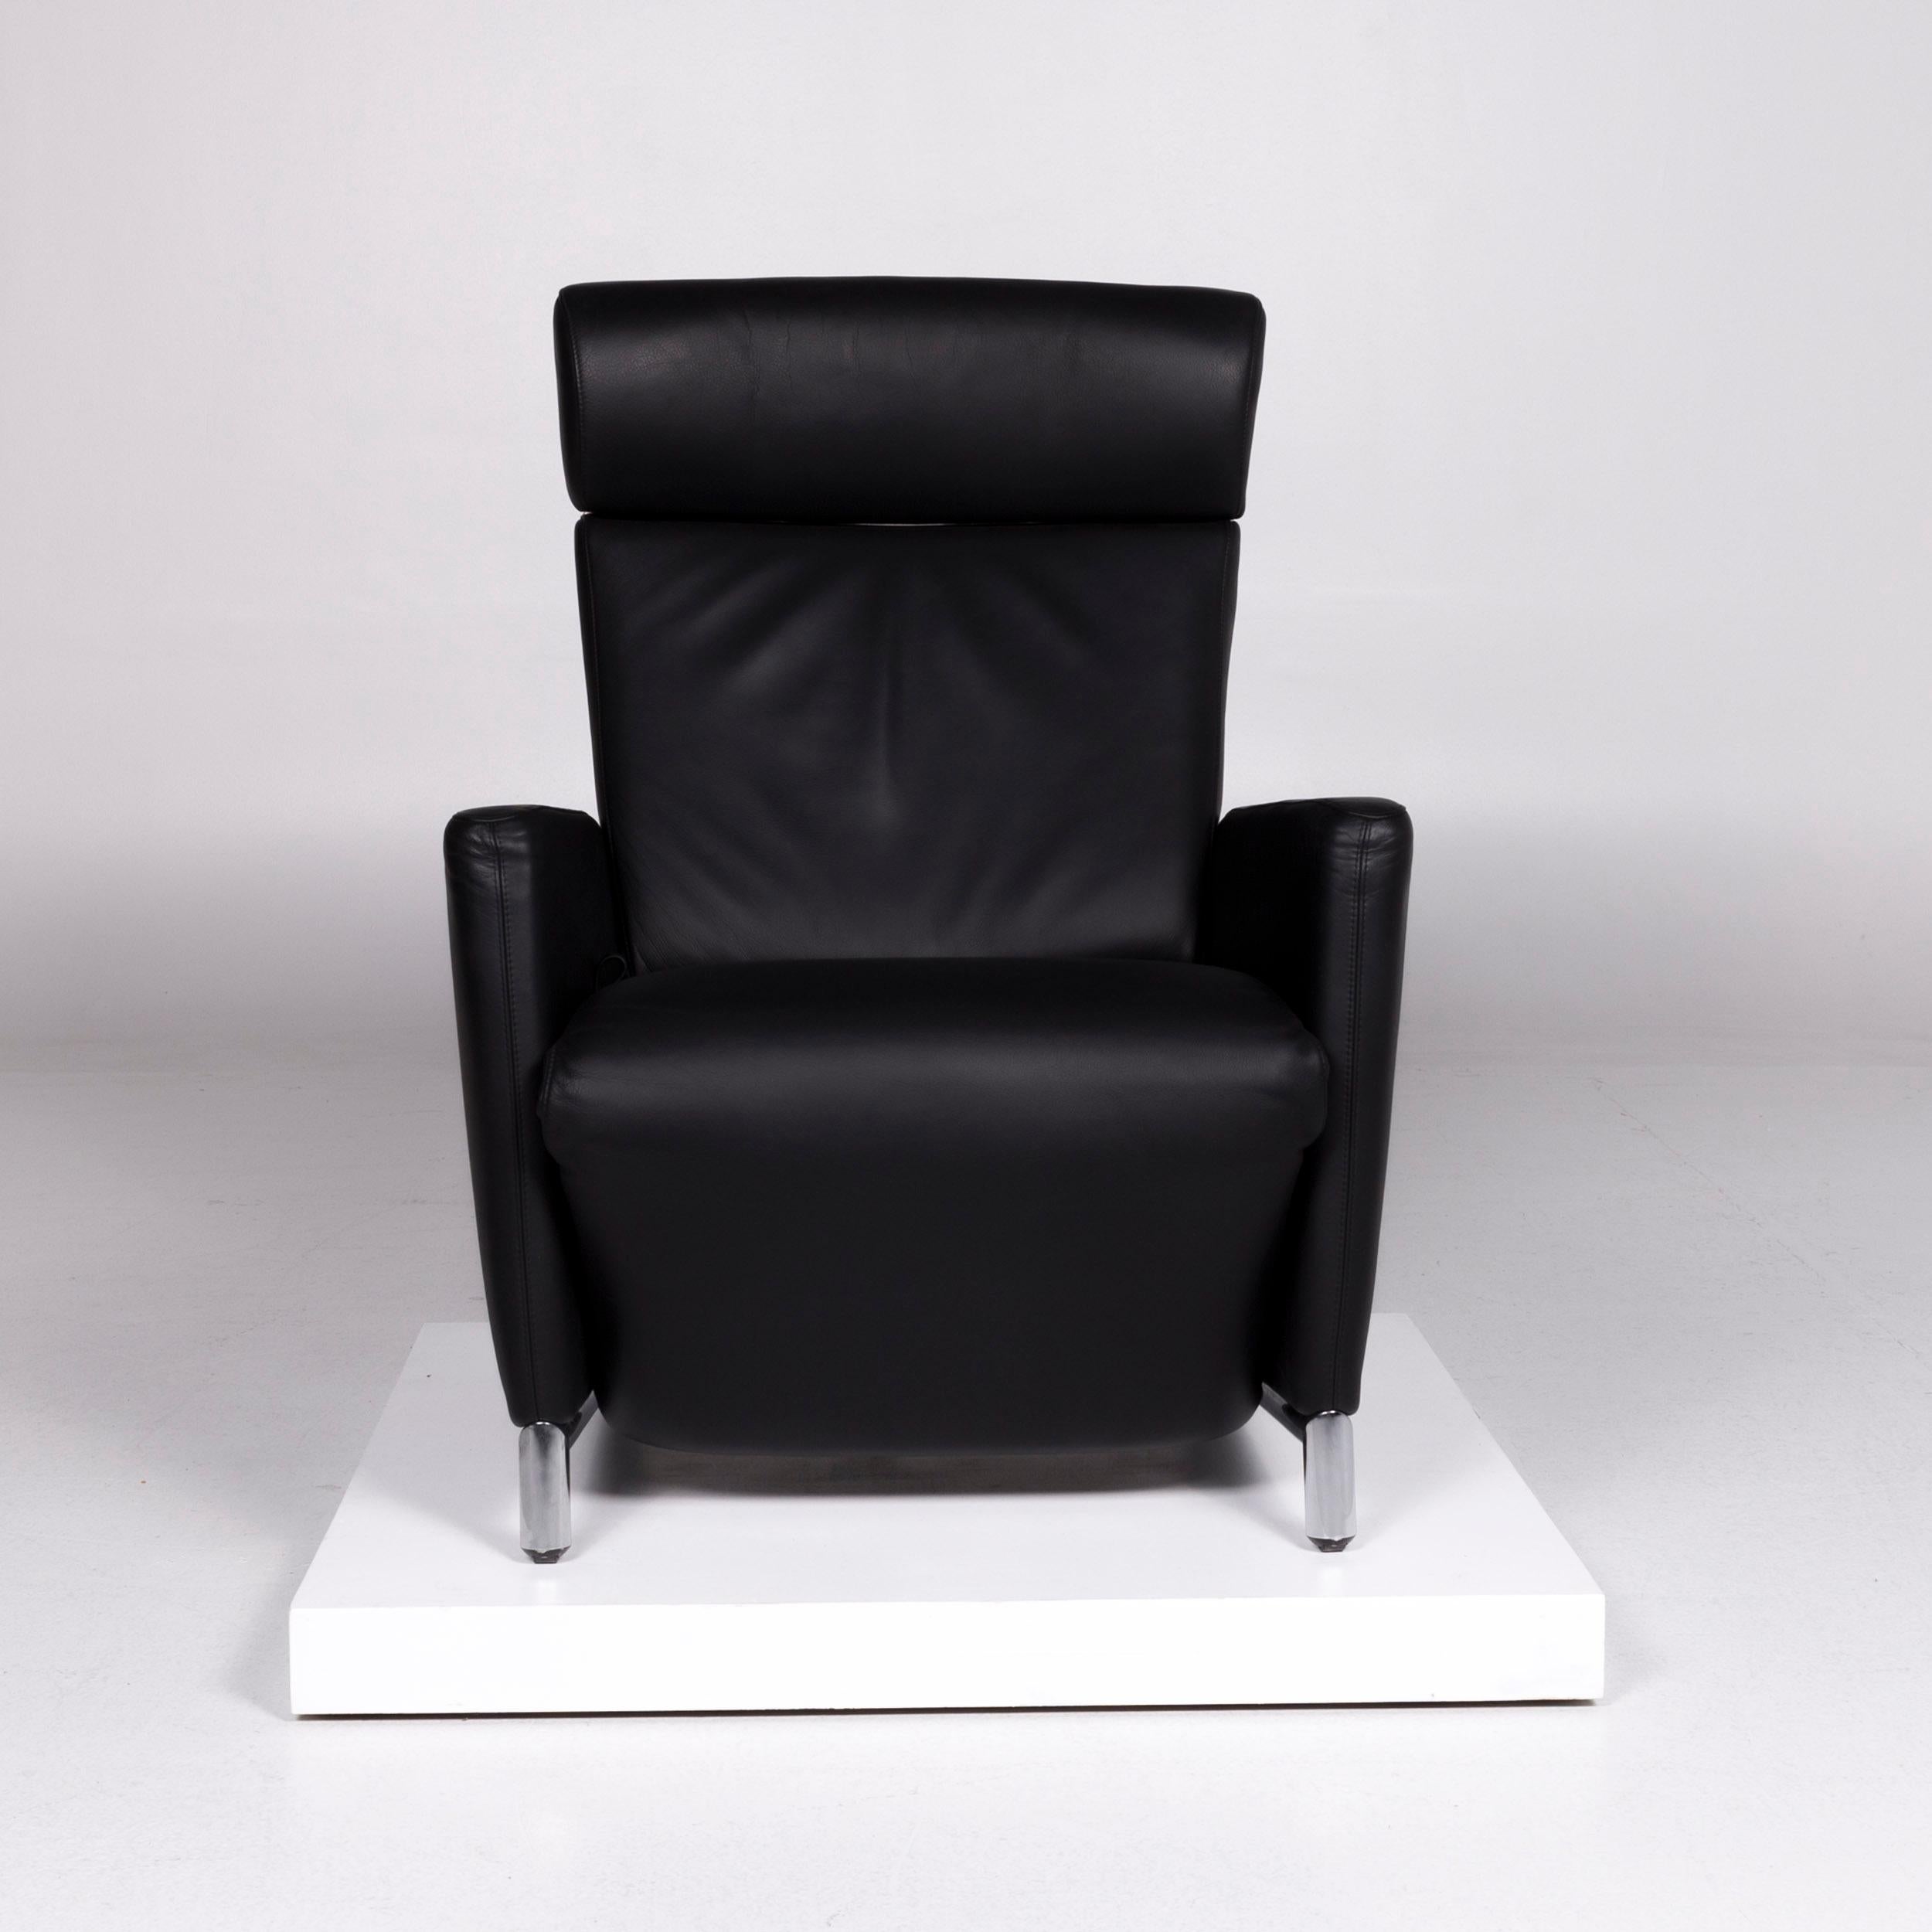 We bring to you a COR Bico leather armchair black incl. Relax function.
  
 

 Product measurements in centimeters:
 

Depth 87
Width 77
Height 103
Seat-height 46
Rest-height 58
Seat-depth 53
Seat-width 56
Back-height 62.